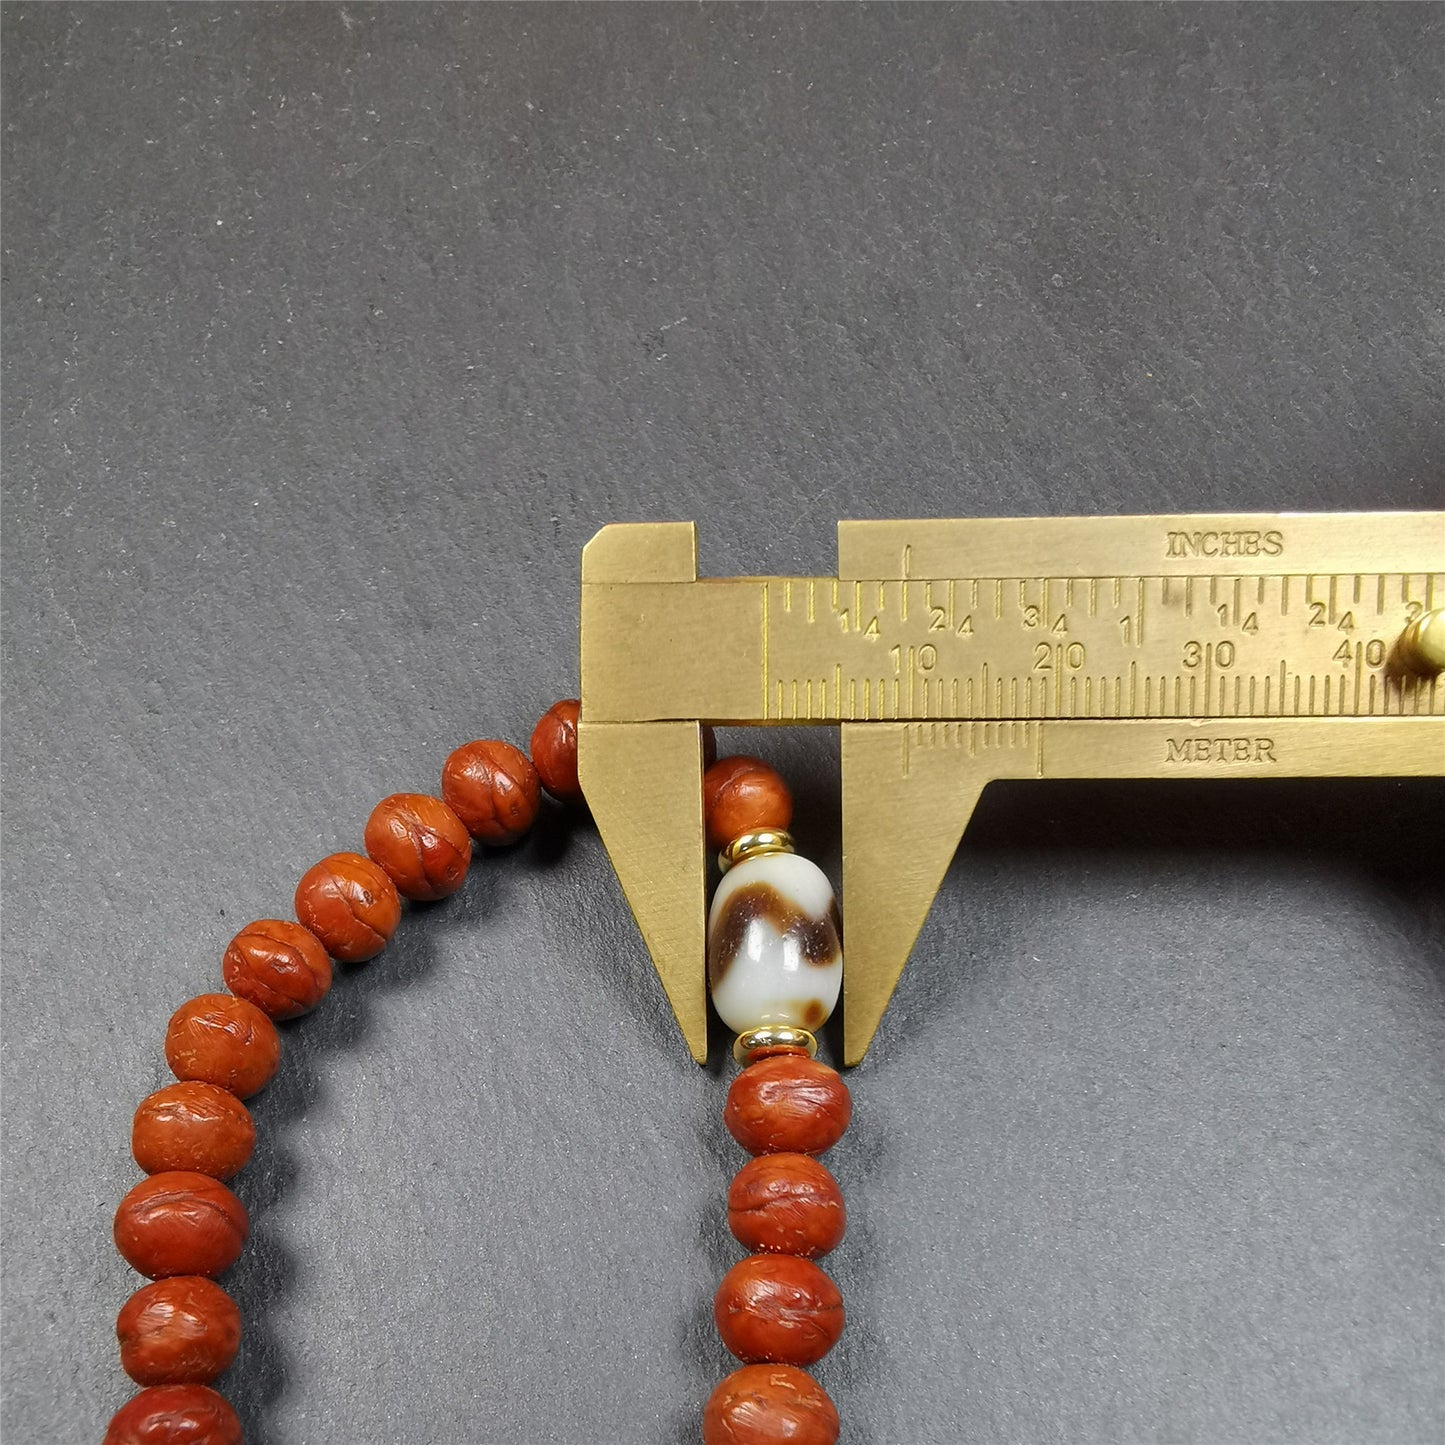 This bodhi beads mala is made by Tibetan craftsmen and come from Hepo Town, Baiyu County, the birthplace of the famous Tibetan handicrafts,about 30 years old, hold and blessed by a lama in Baiyu Monastery.  It is composed of 108 bodhi seed beads, and is equipped with 3 dzi beads, silver bead counters are installed on both sides, 1 mantra dots bead clip,and finally consists a silver vajra on the end, very elegant.